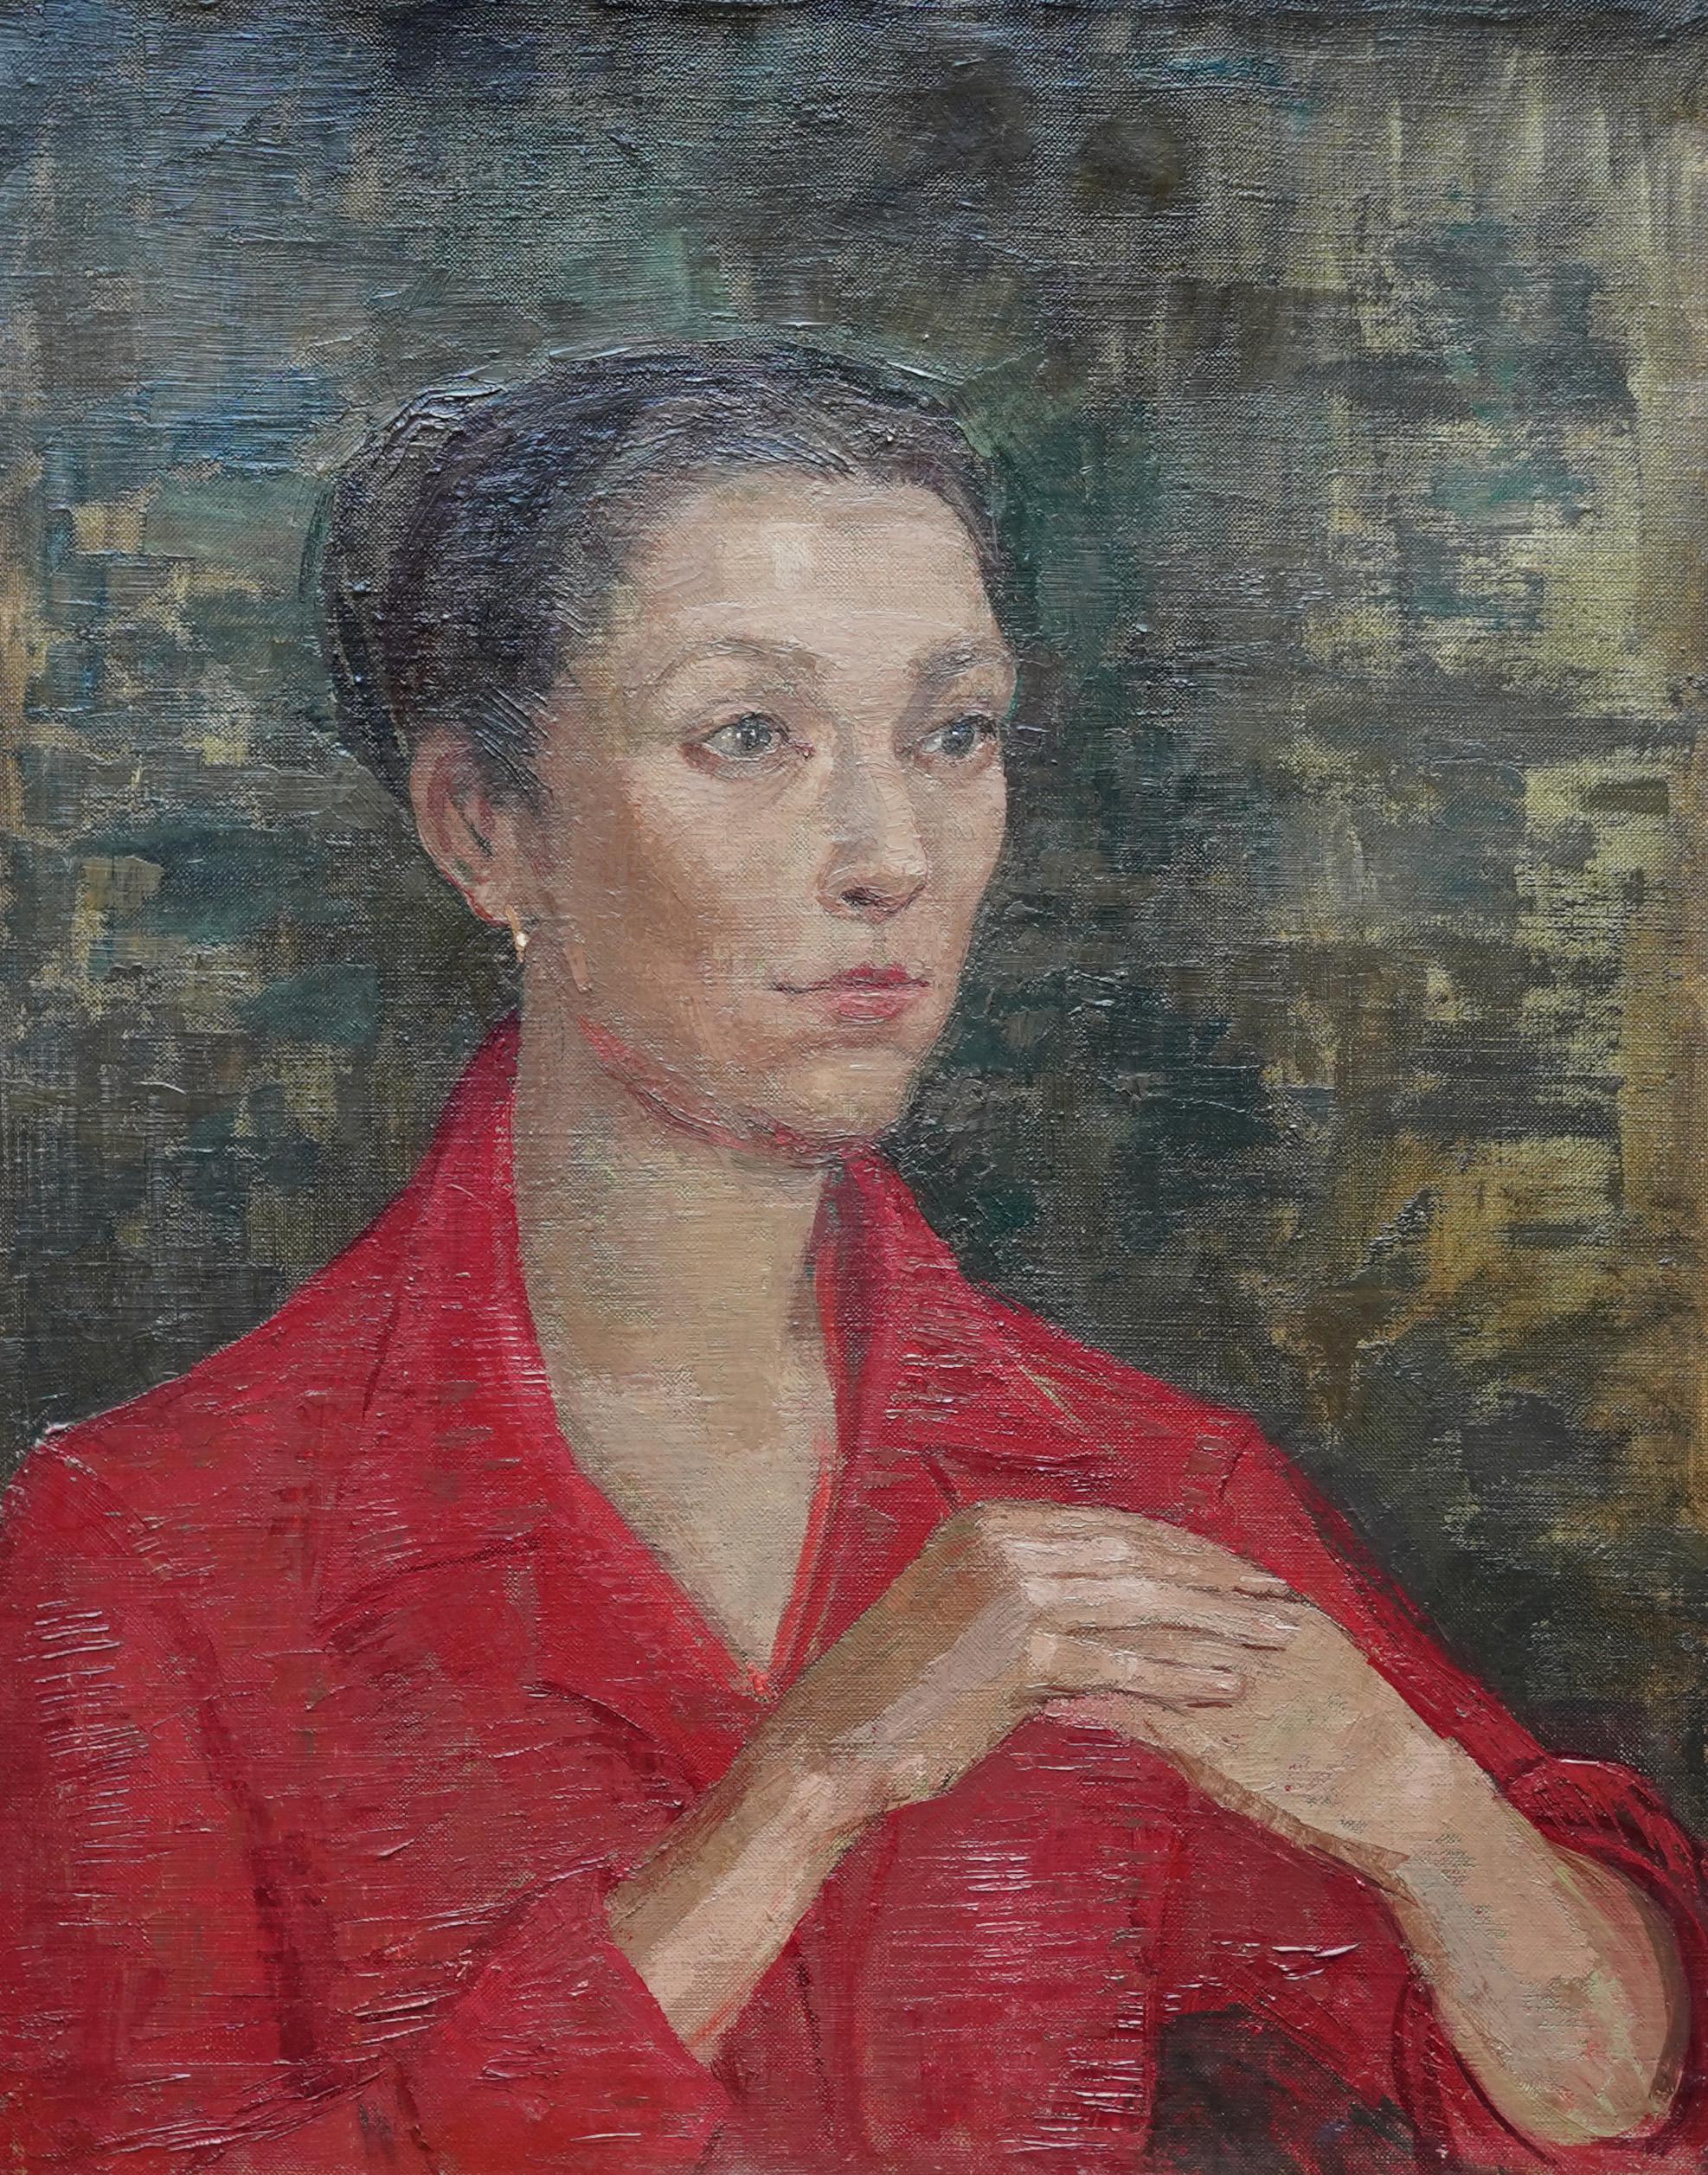 A super circa 1955 British portrait oil painting in tones of red.  A very evocative period portrait of a woman painted by British listed female artist Constance Anne Parker. A highly regarded artist the style is very evocative of the 1950's and owes